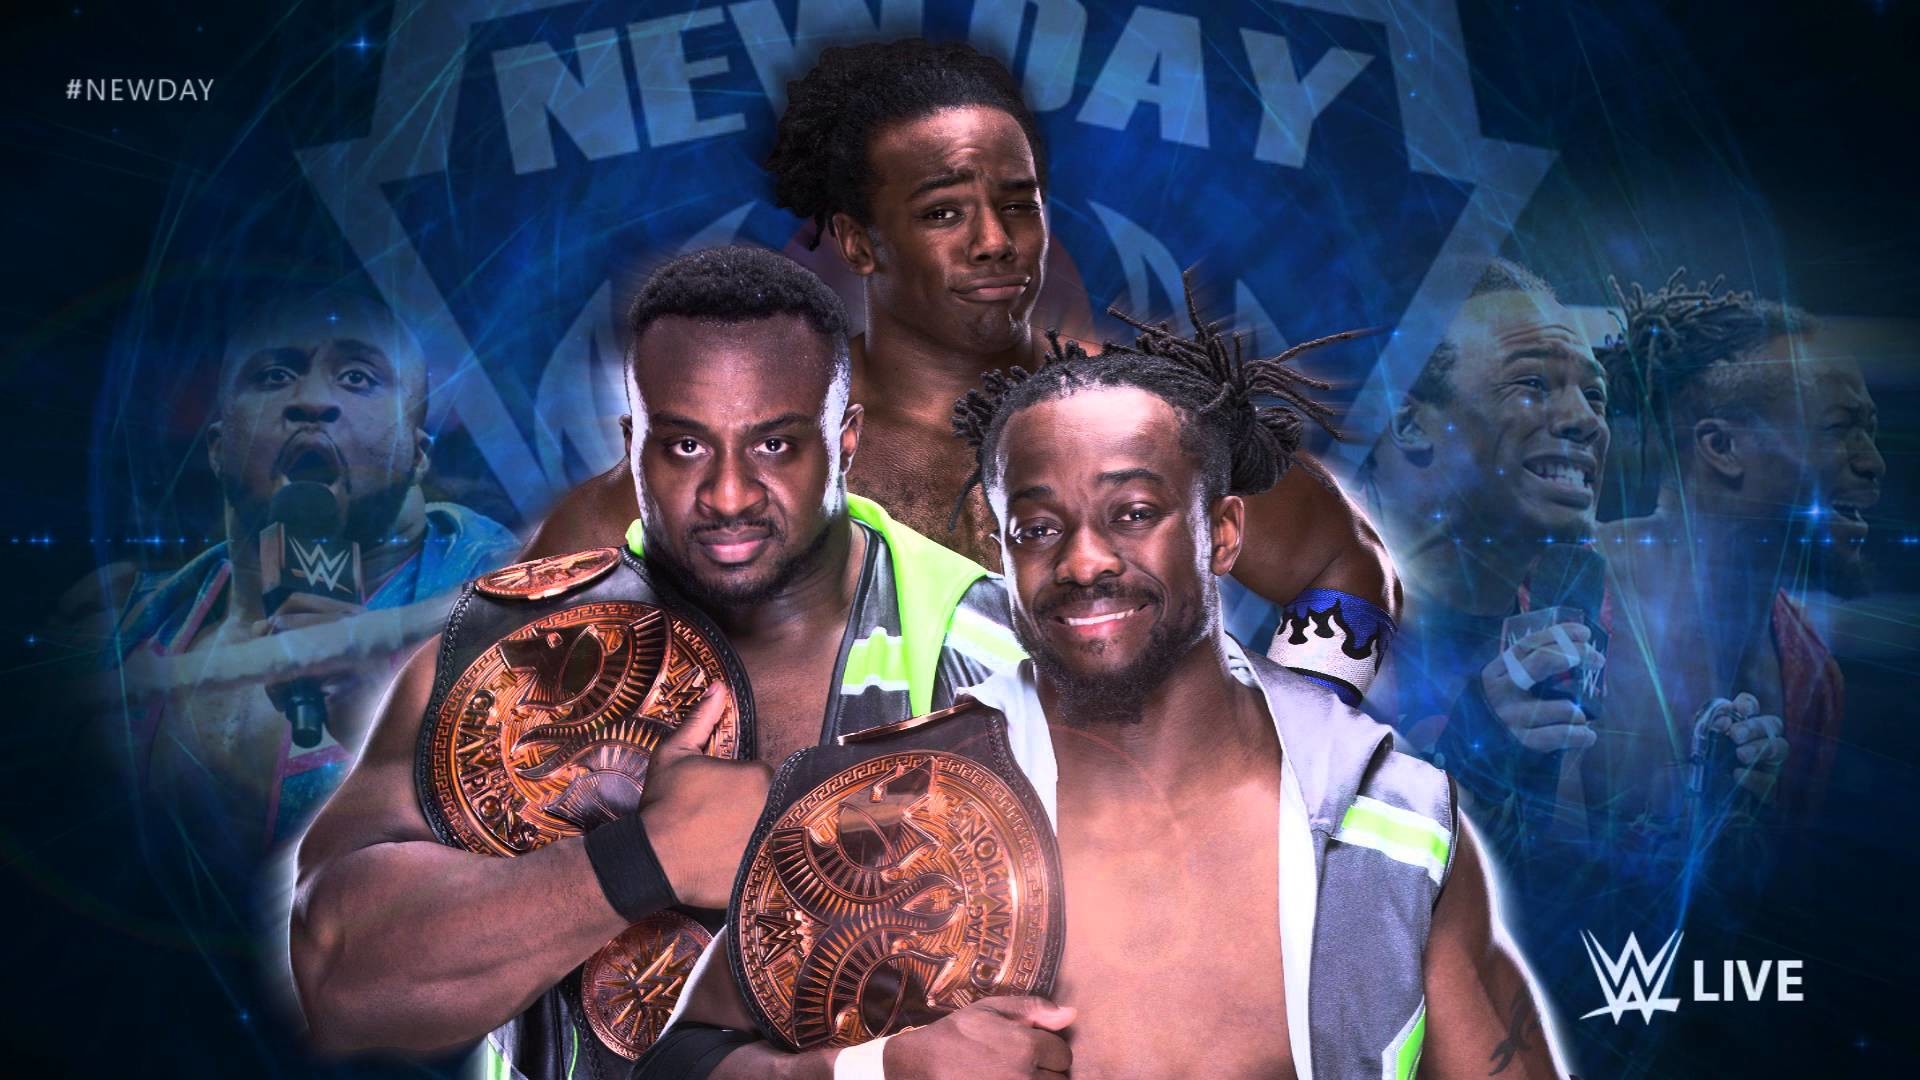 1920x1080 2015-2016: The New Day 2nd WWE Theme Song "New Day, New Way" with Download  Link - YouTube